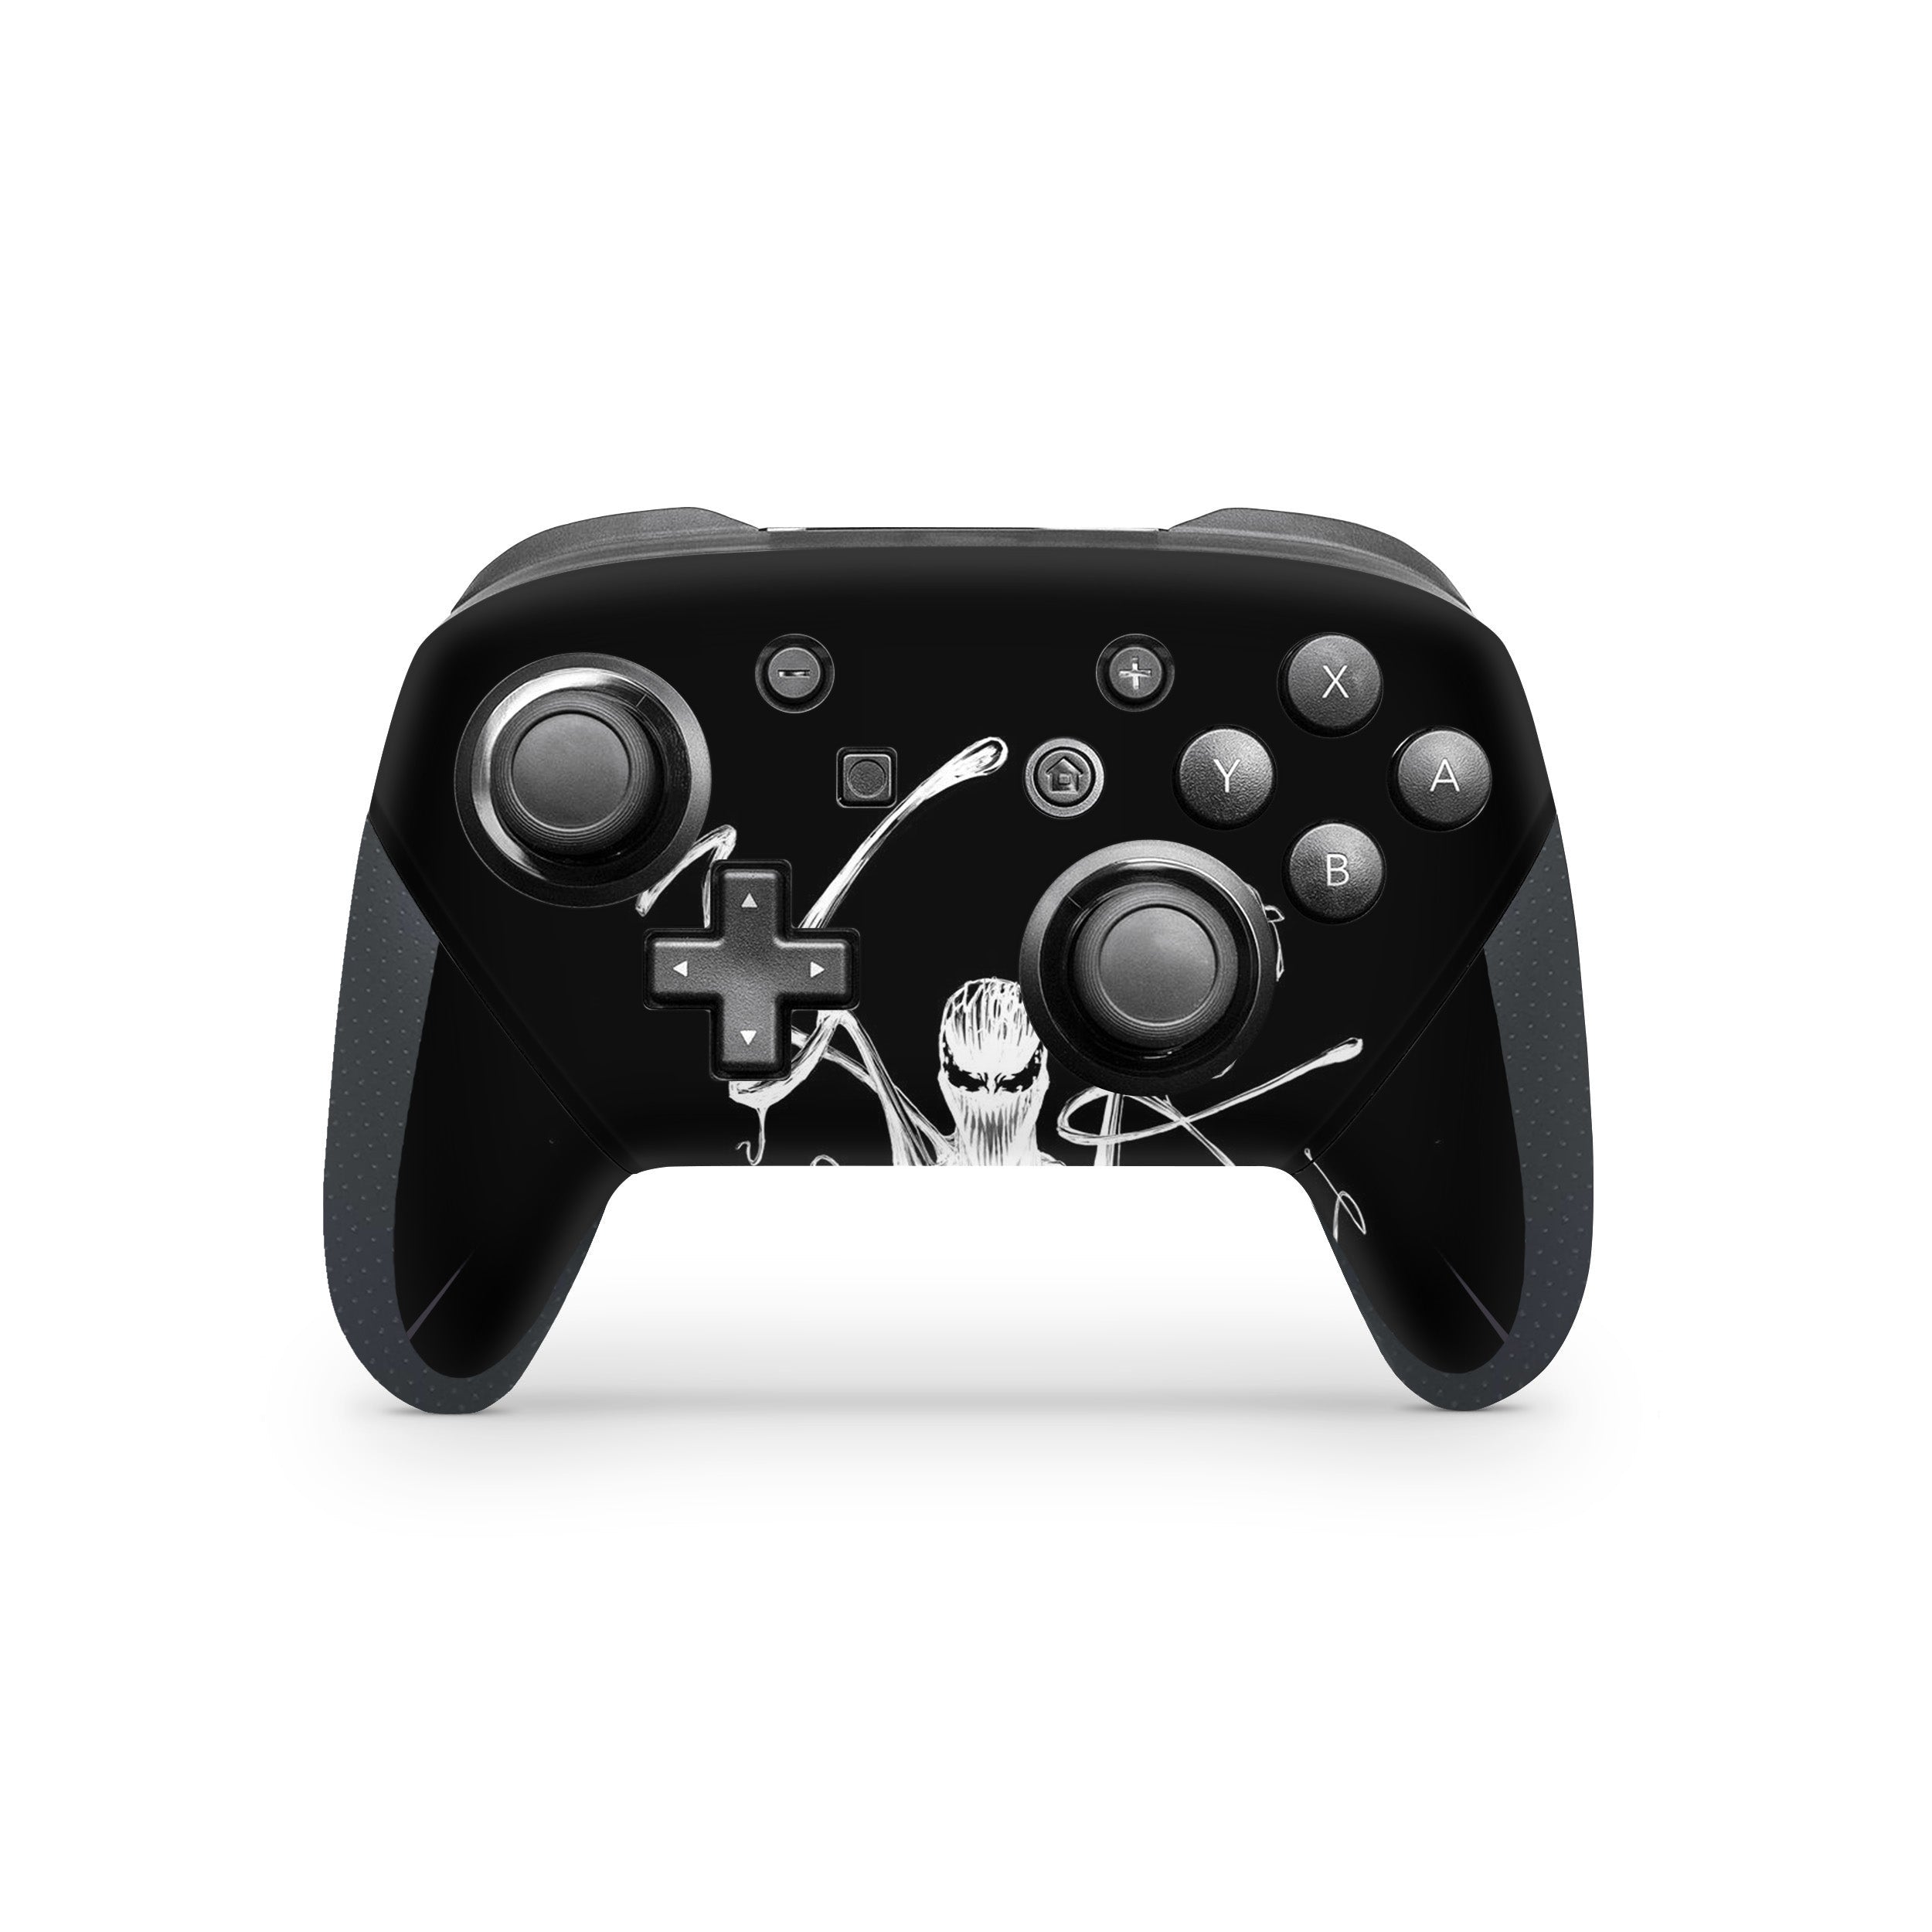 A video game skin featuring a Marvel Venom design for the Switch Pro Controller.